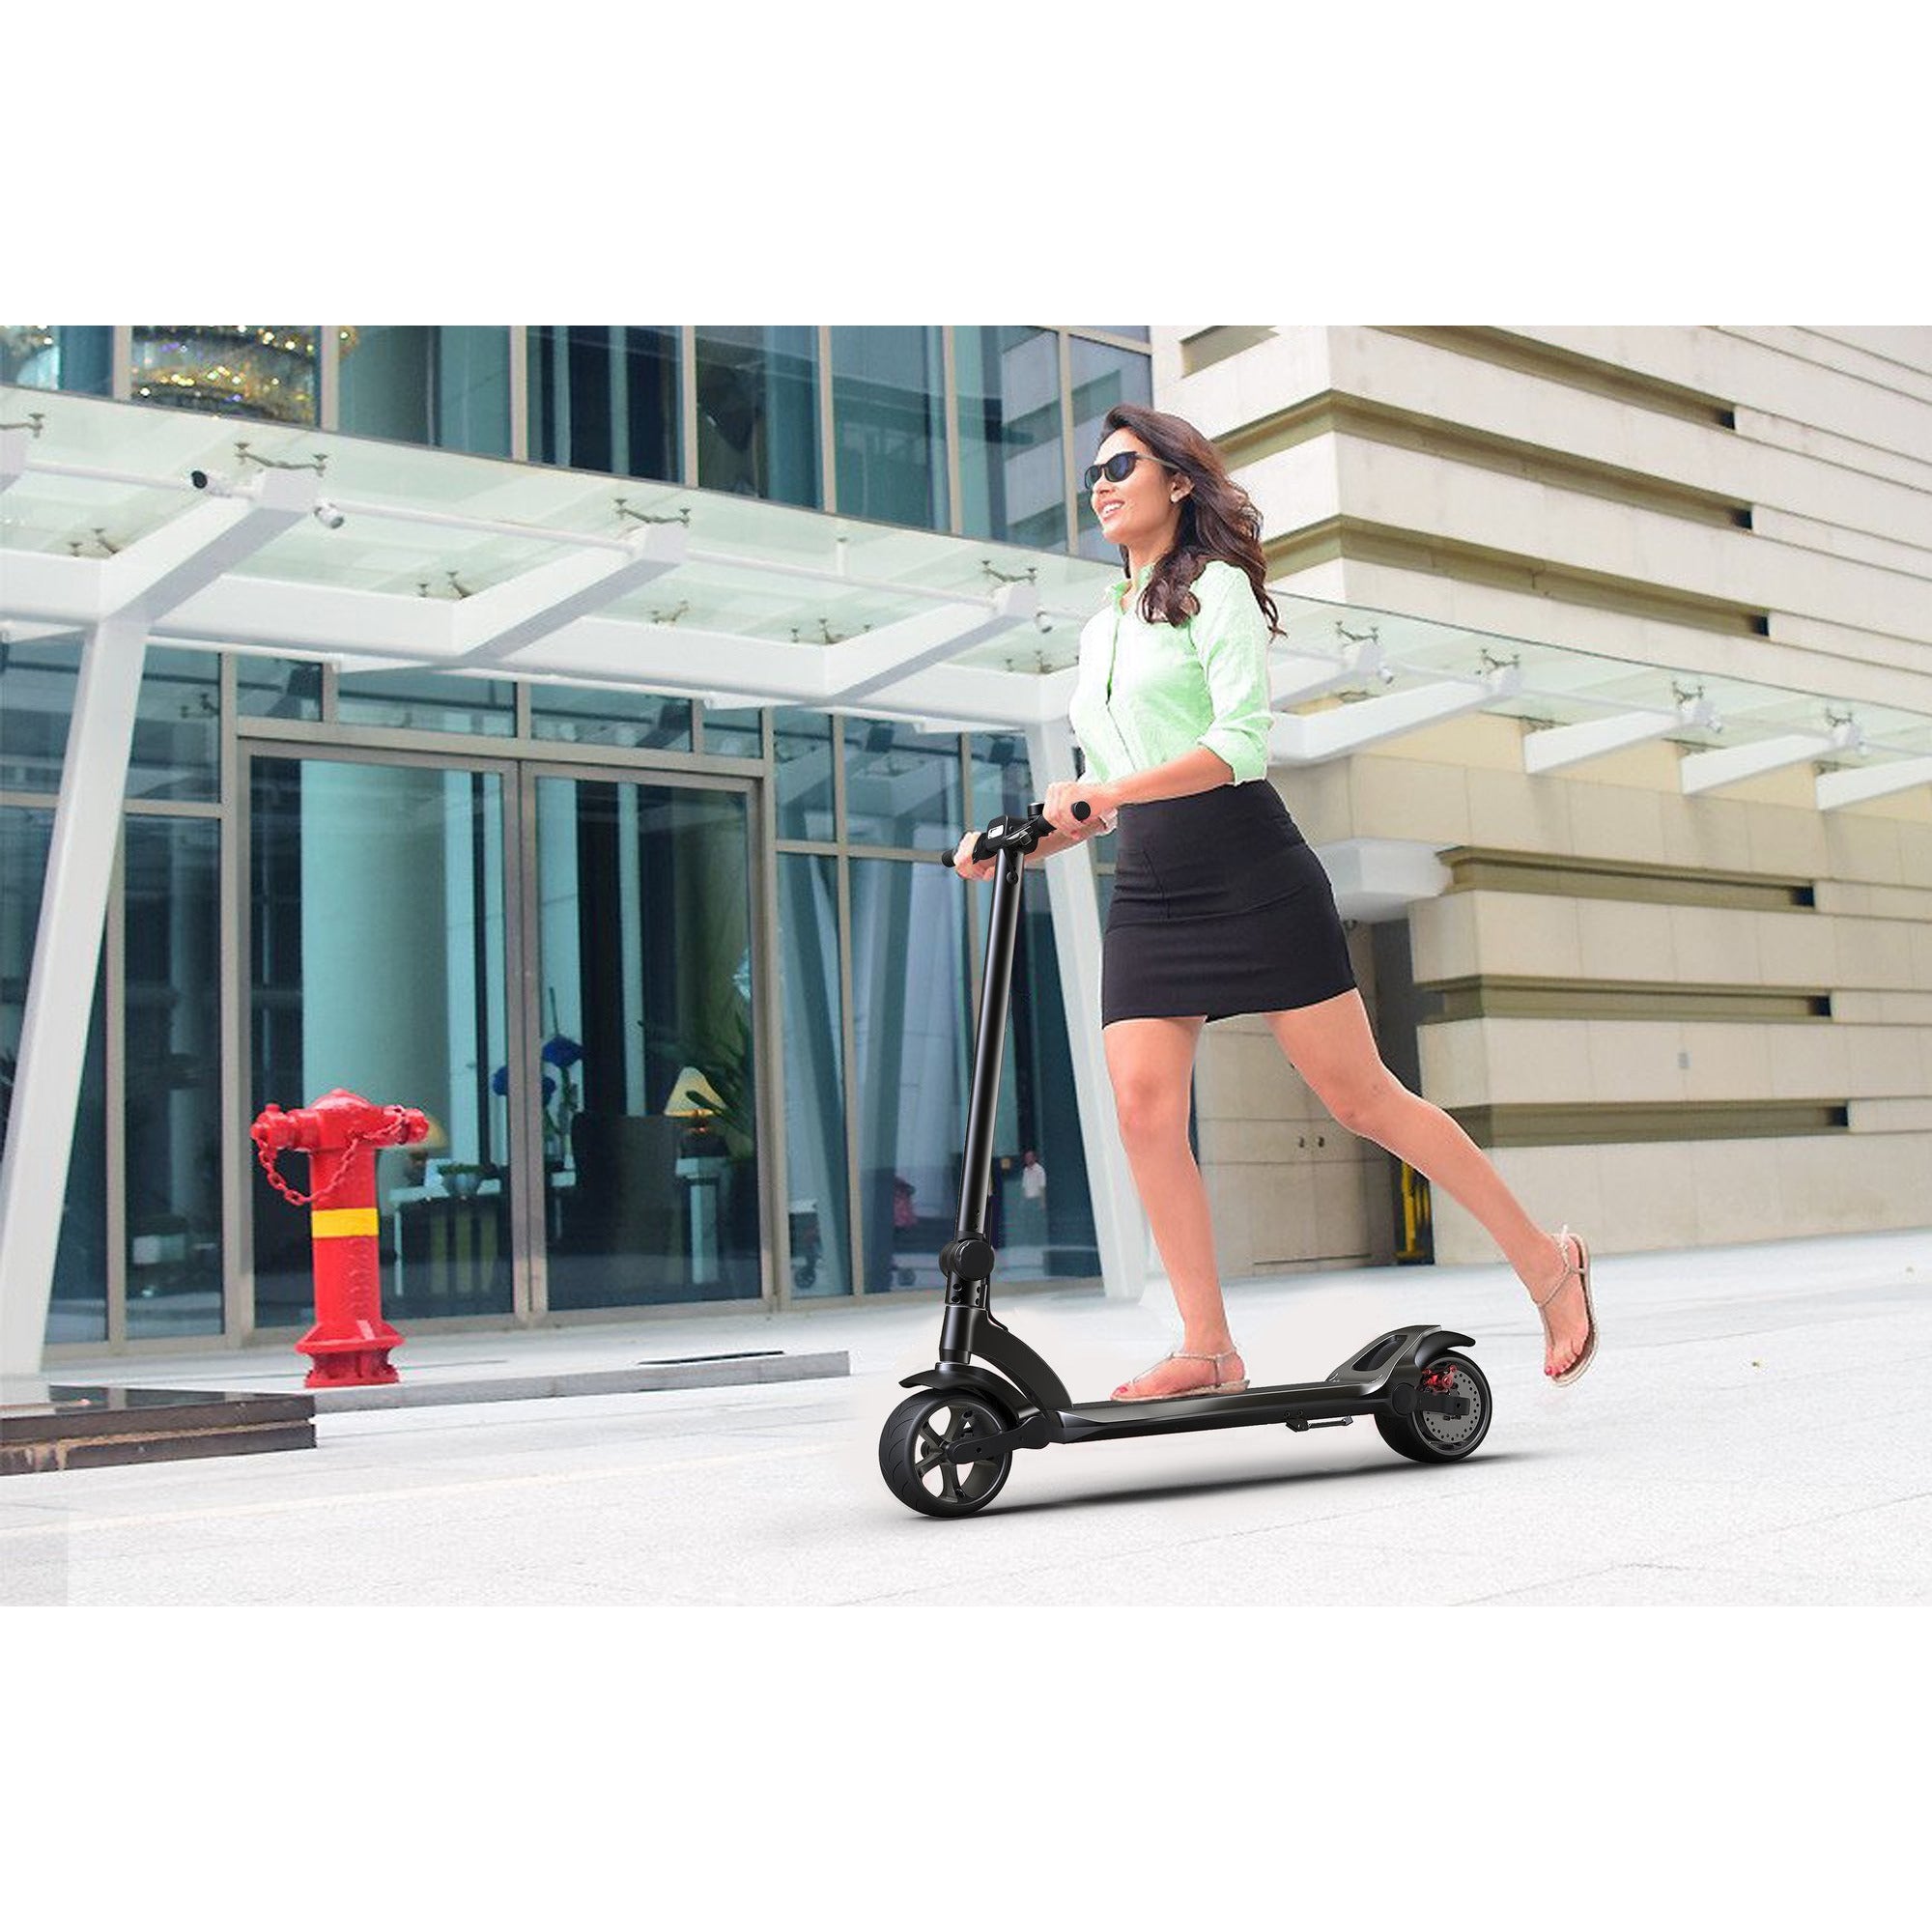 https://cdn.shopifycdn.net/s/files/1/0273/7691/0433/products/glarewheel-48v-720wh-1000w-adult-commuter-folding-electric-scooter-es-s11pro-28413877846213.jpg?v=1618910345